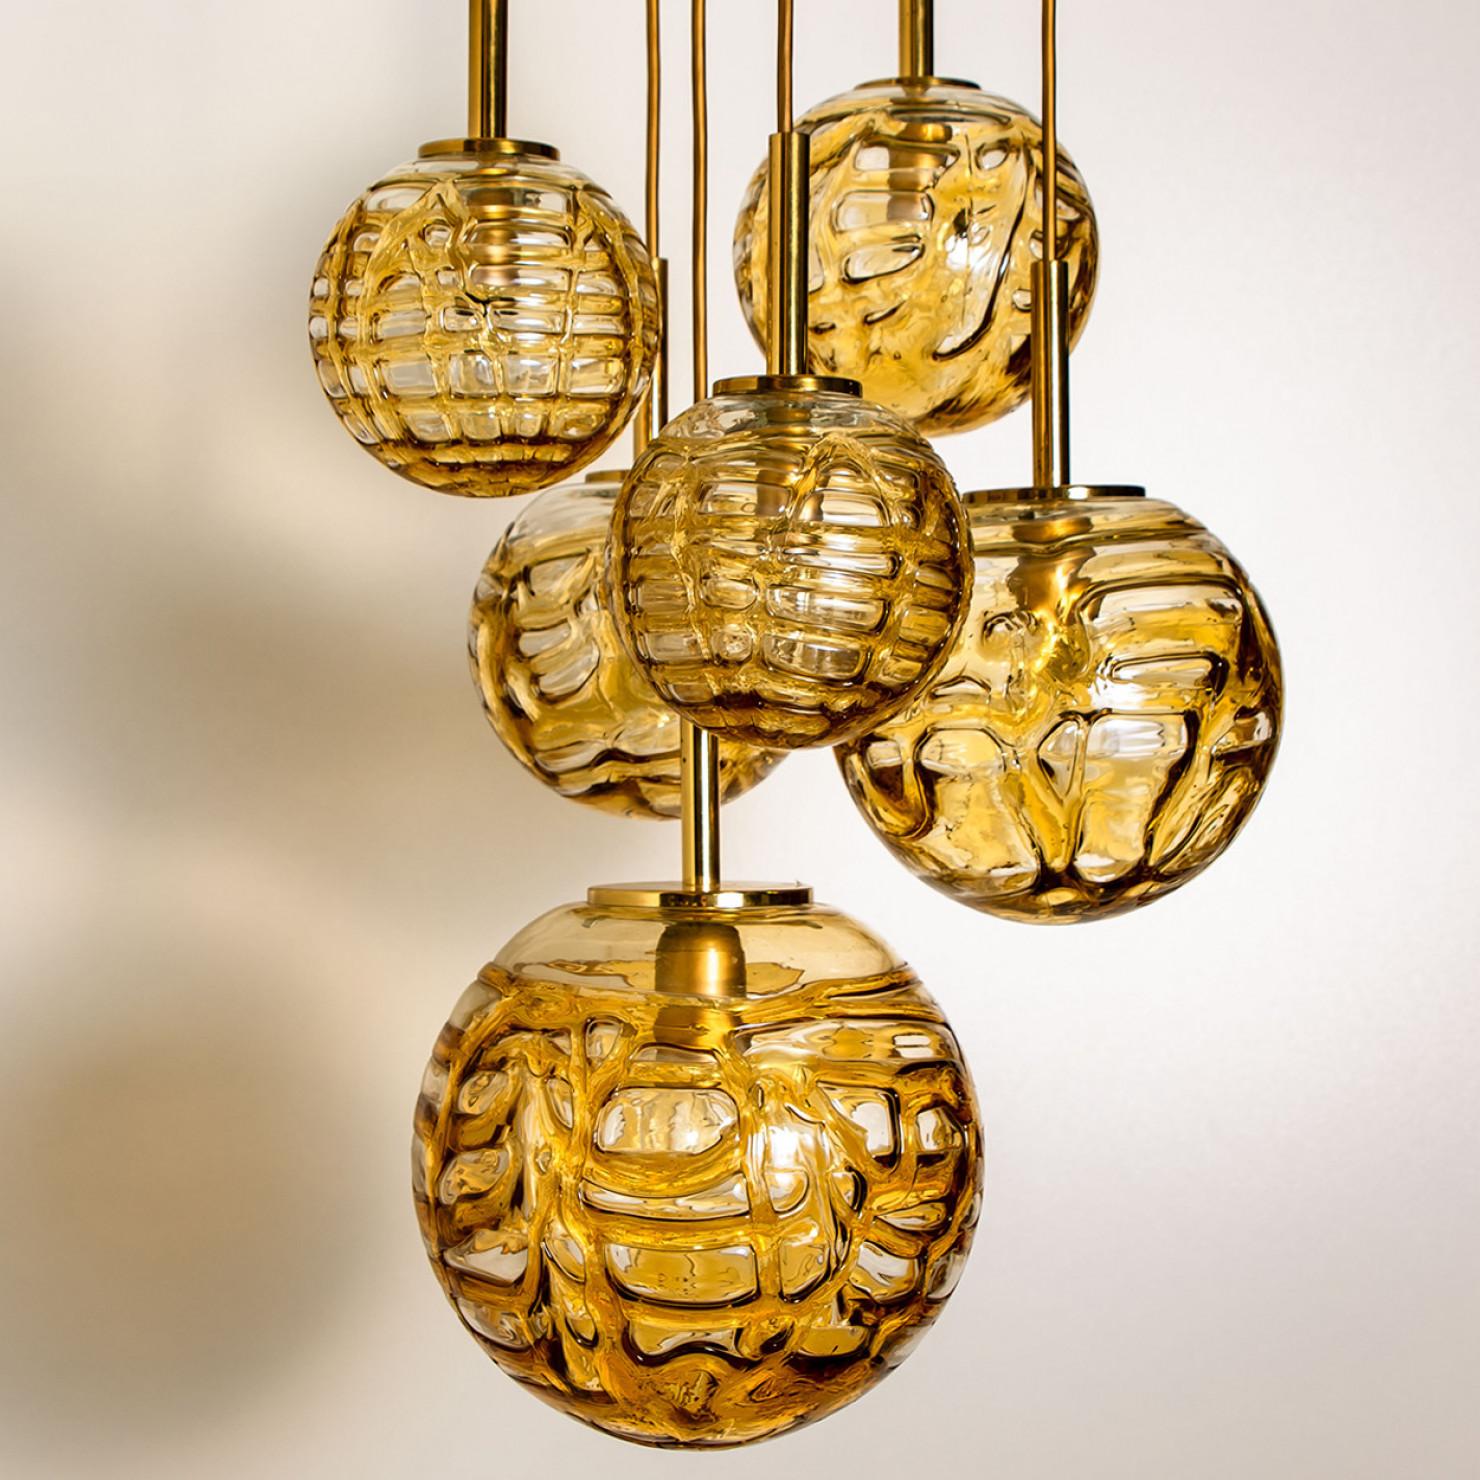 Absolutely amazing huge high-end ceiling mount pendant light fixture with six different globes by Doria Leuchten, manufacturered around 1960s. With hand blown heavy and high quality murano glass globes in 6.7